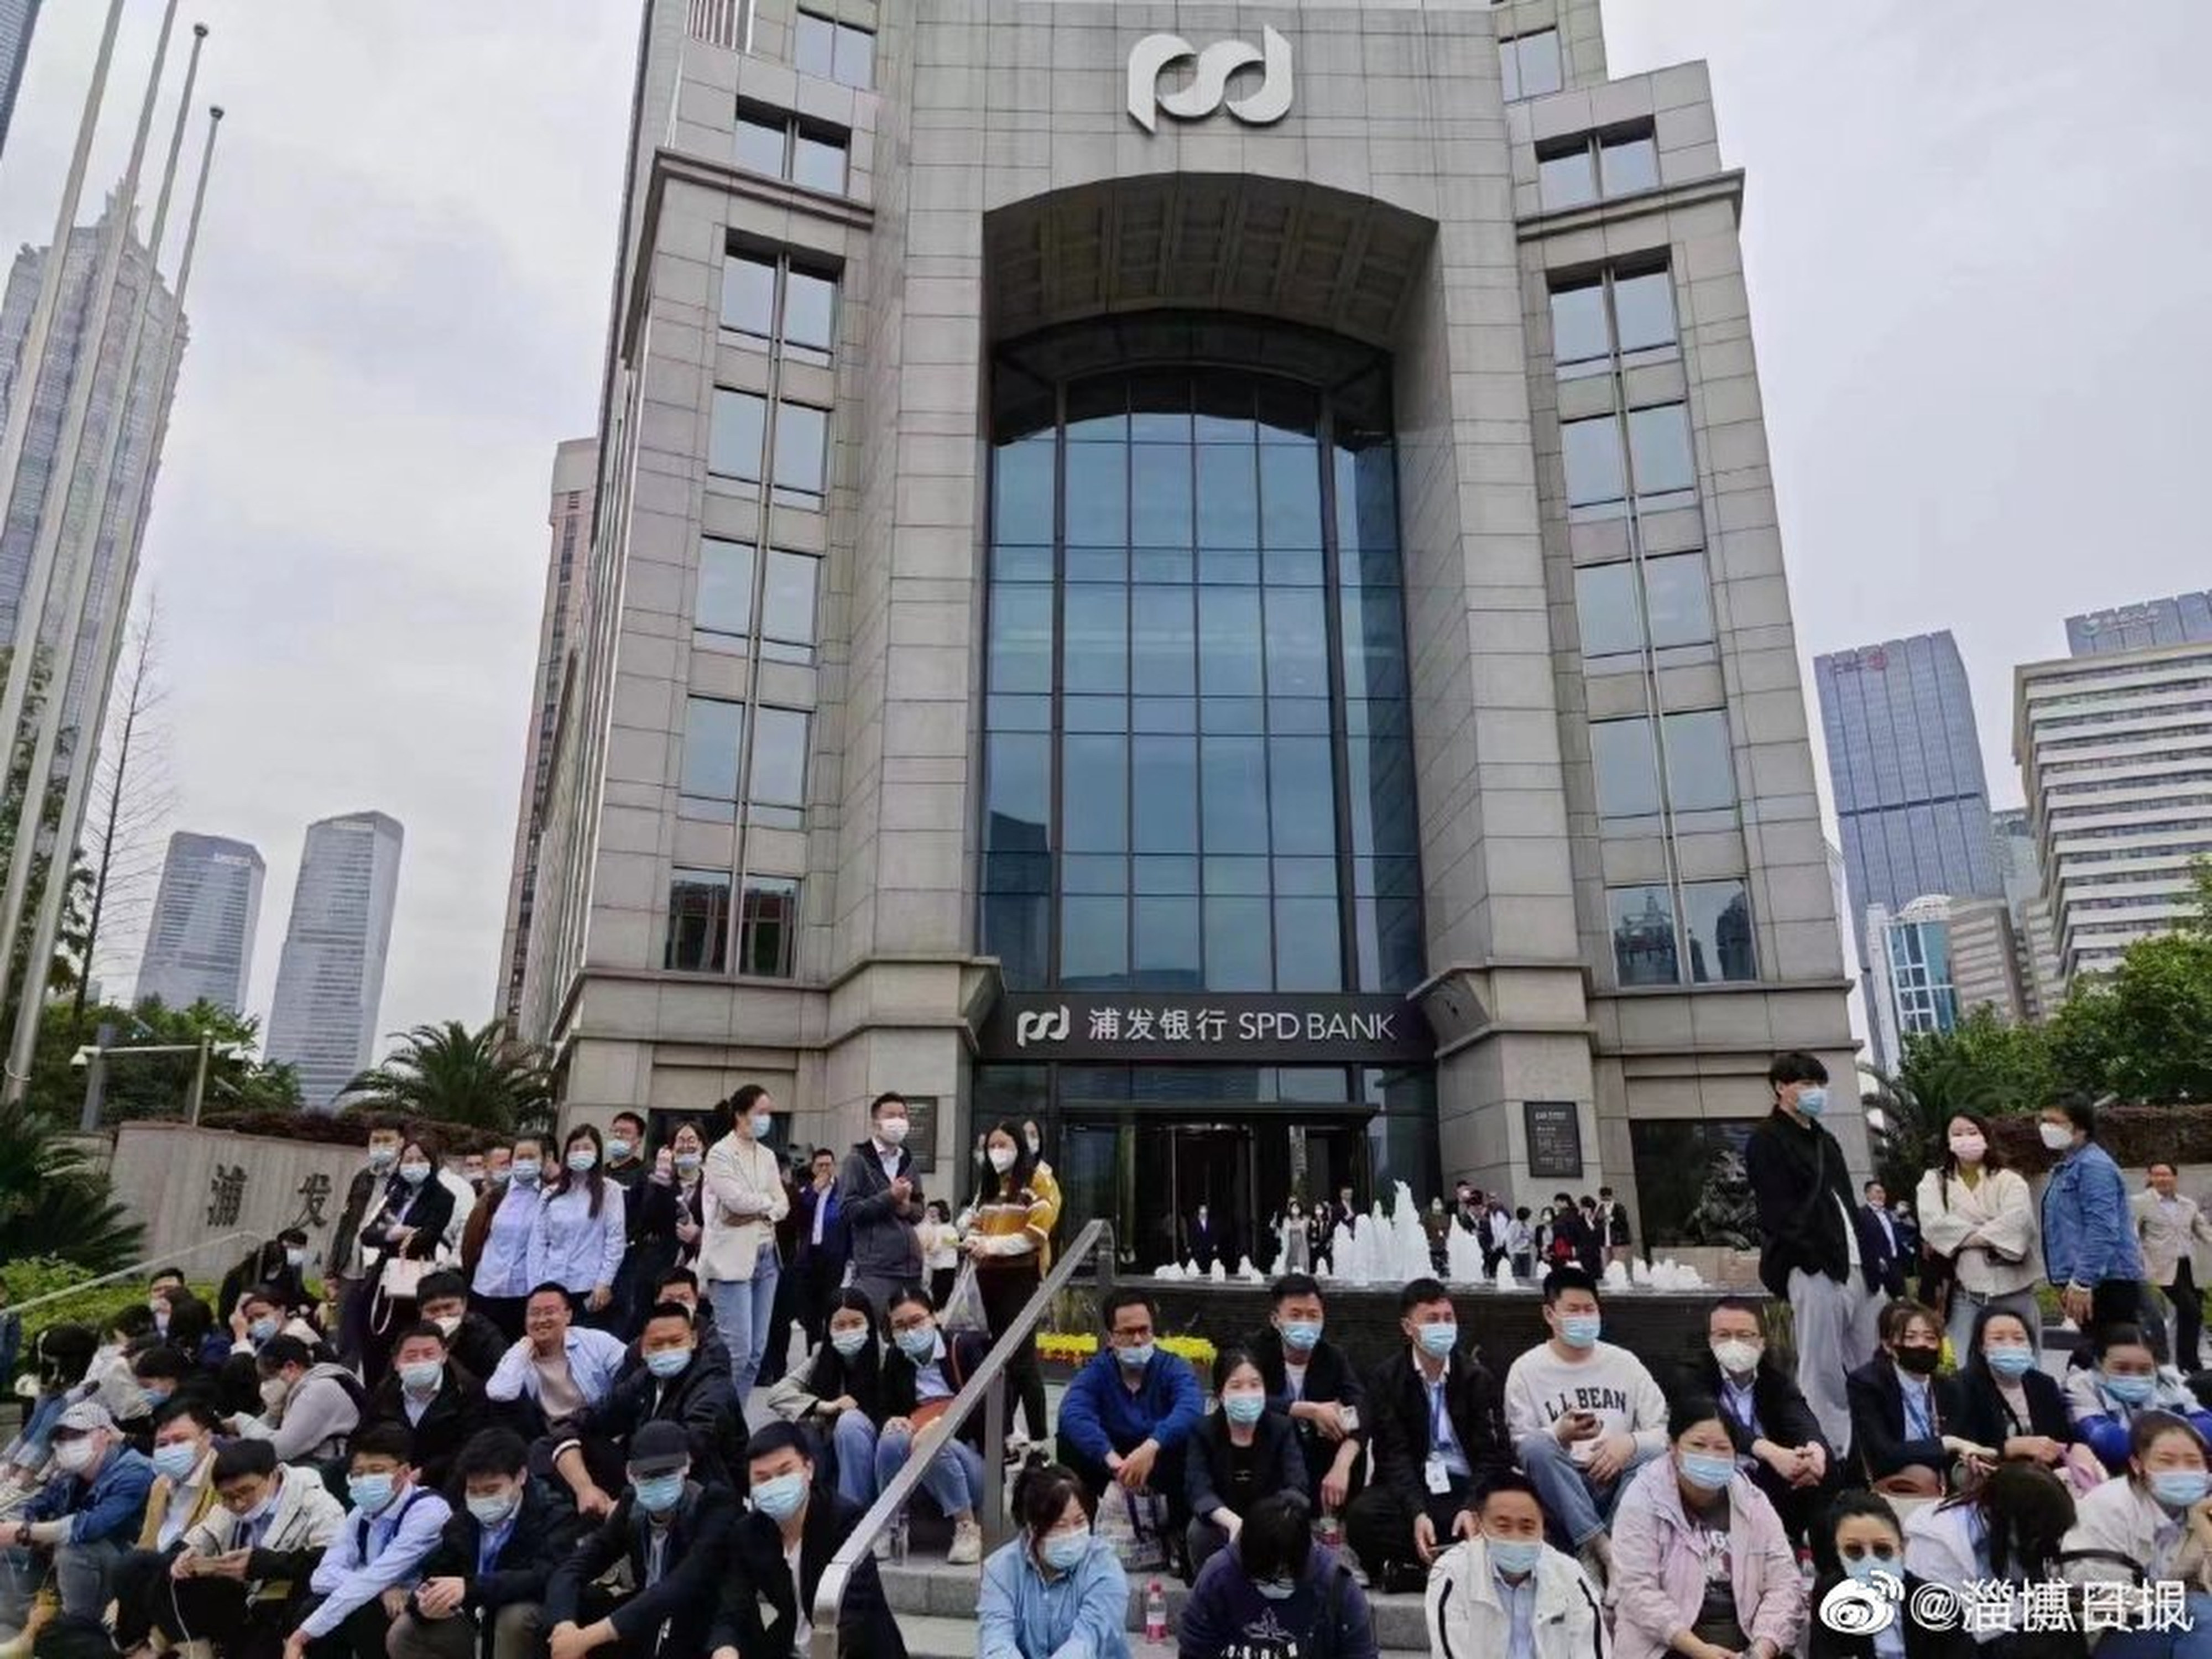 The employees of a provider of IT services to Shanghai Pudong Development Bank protest outside a branch of the bank’s in Shanghai on Thursday afternoon. Photo: Weibo